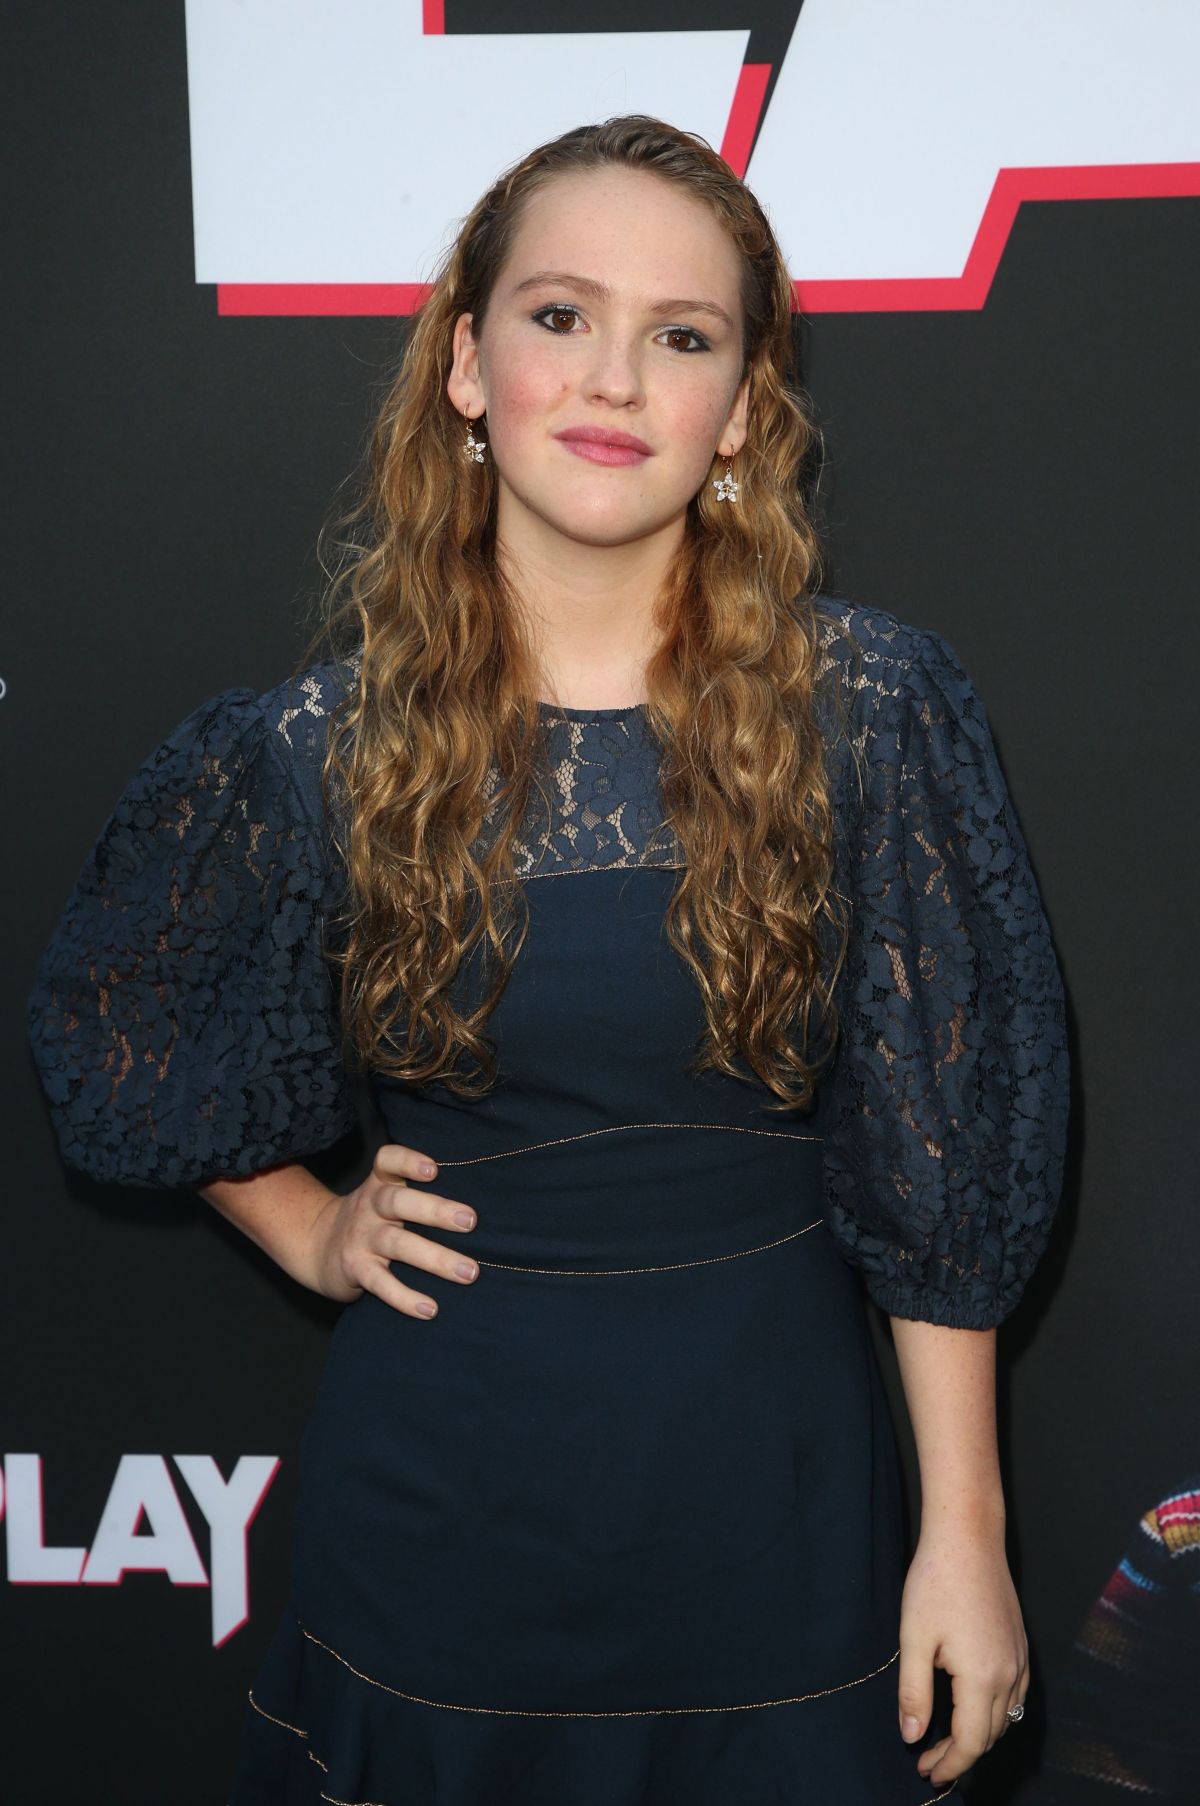 TALITHA BATEMAN at Child’s Play Premiere in Hollywood 06/19/2019 – HawtCelebs1200 x 1806